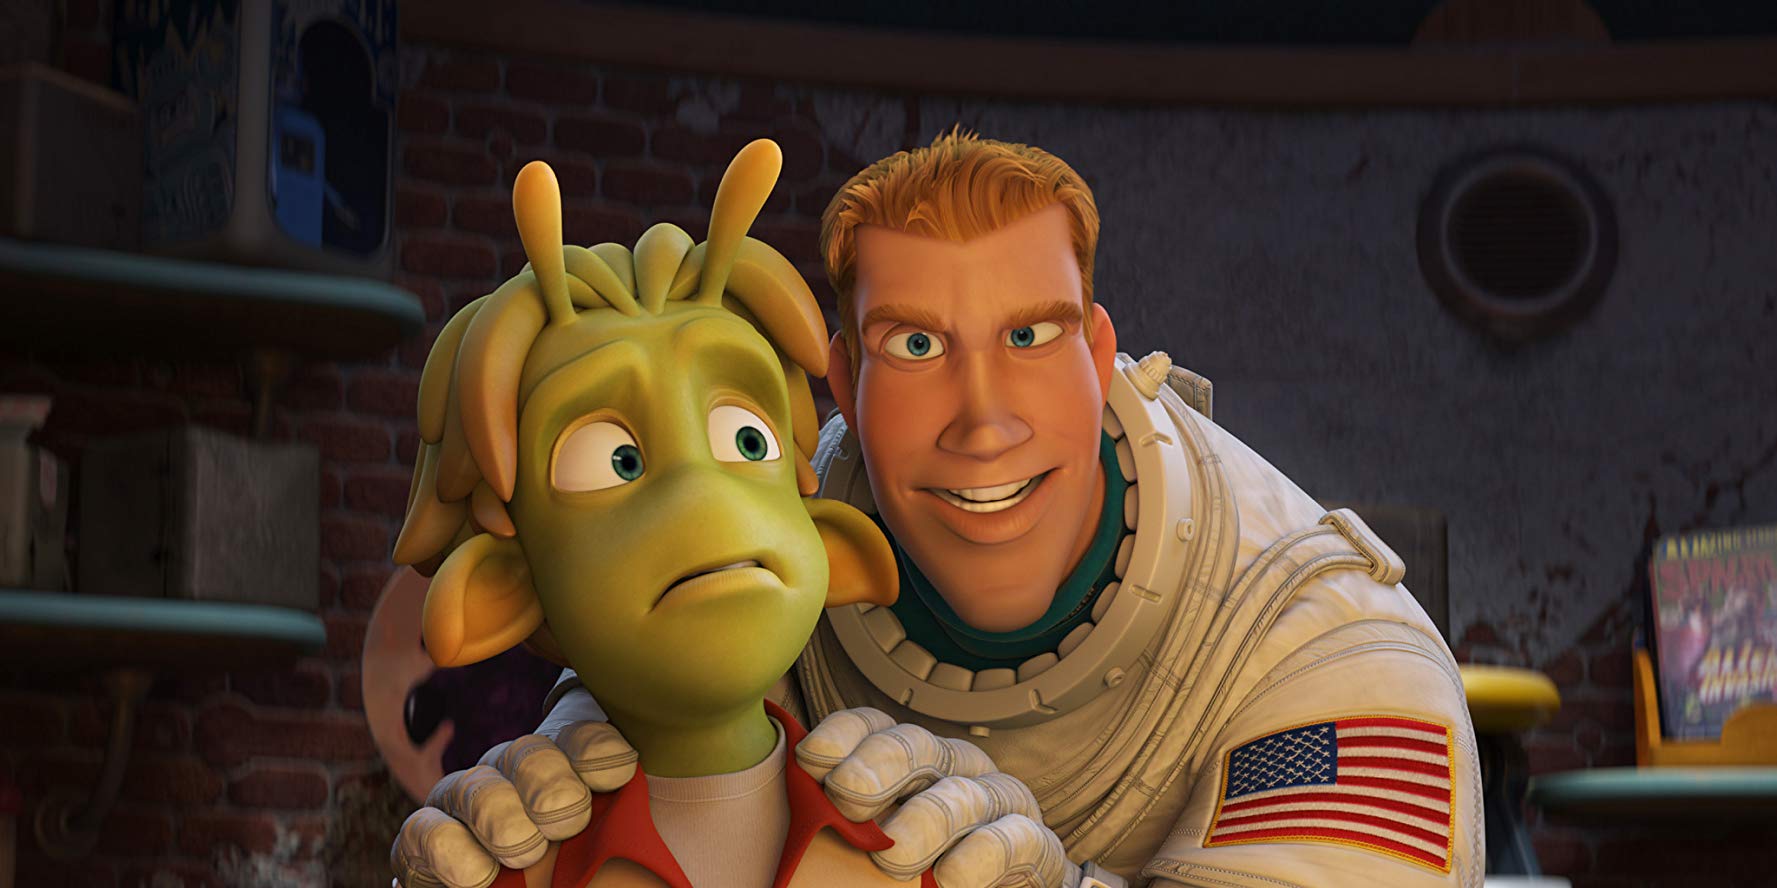 Human astronaut Chuck Baker (voiced by Dwayne Johnson) and his alien friend Lem (voiced by Justin Long) in Planet 51 (2009)